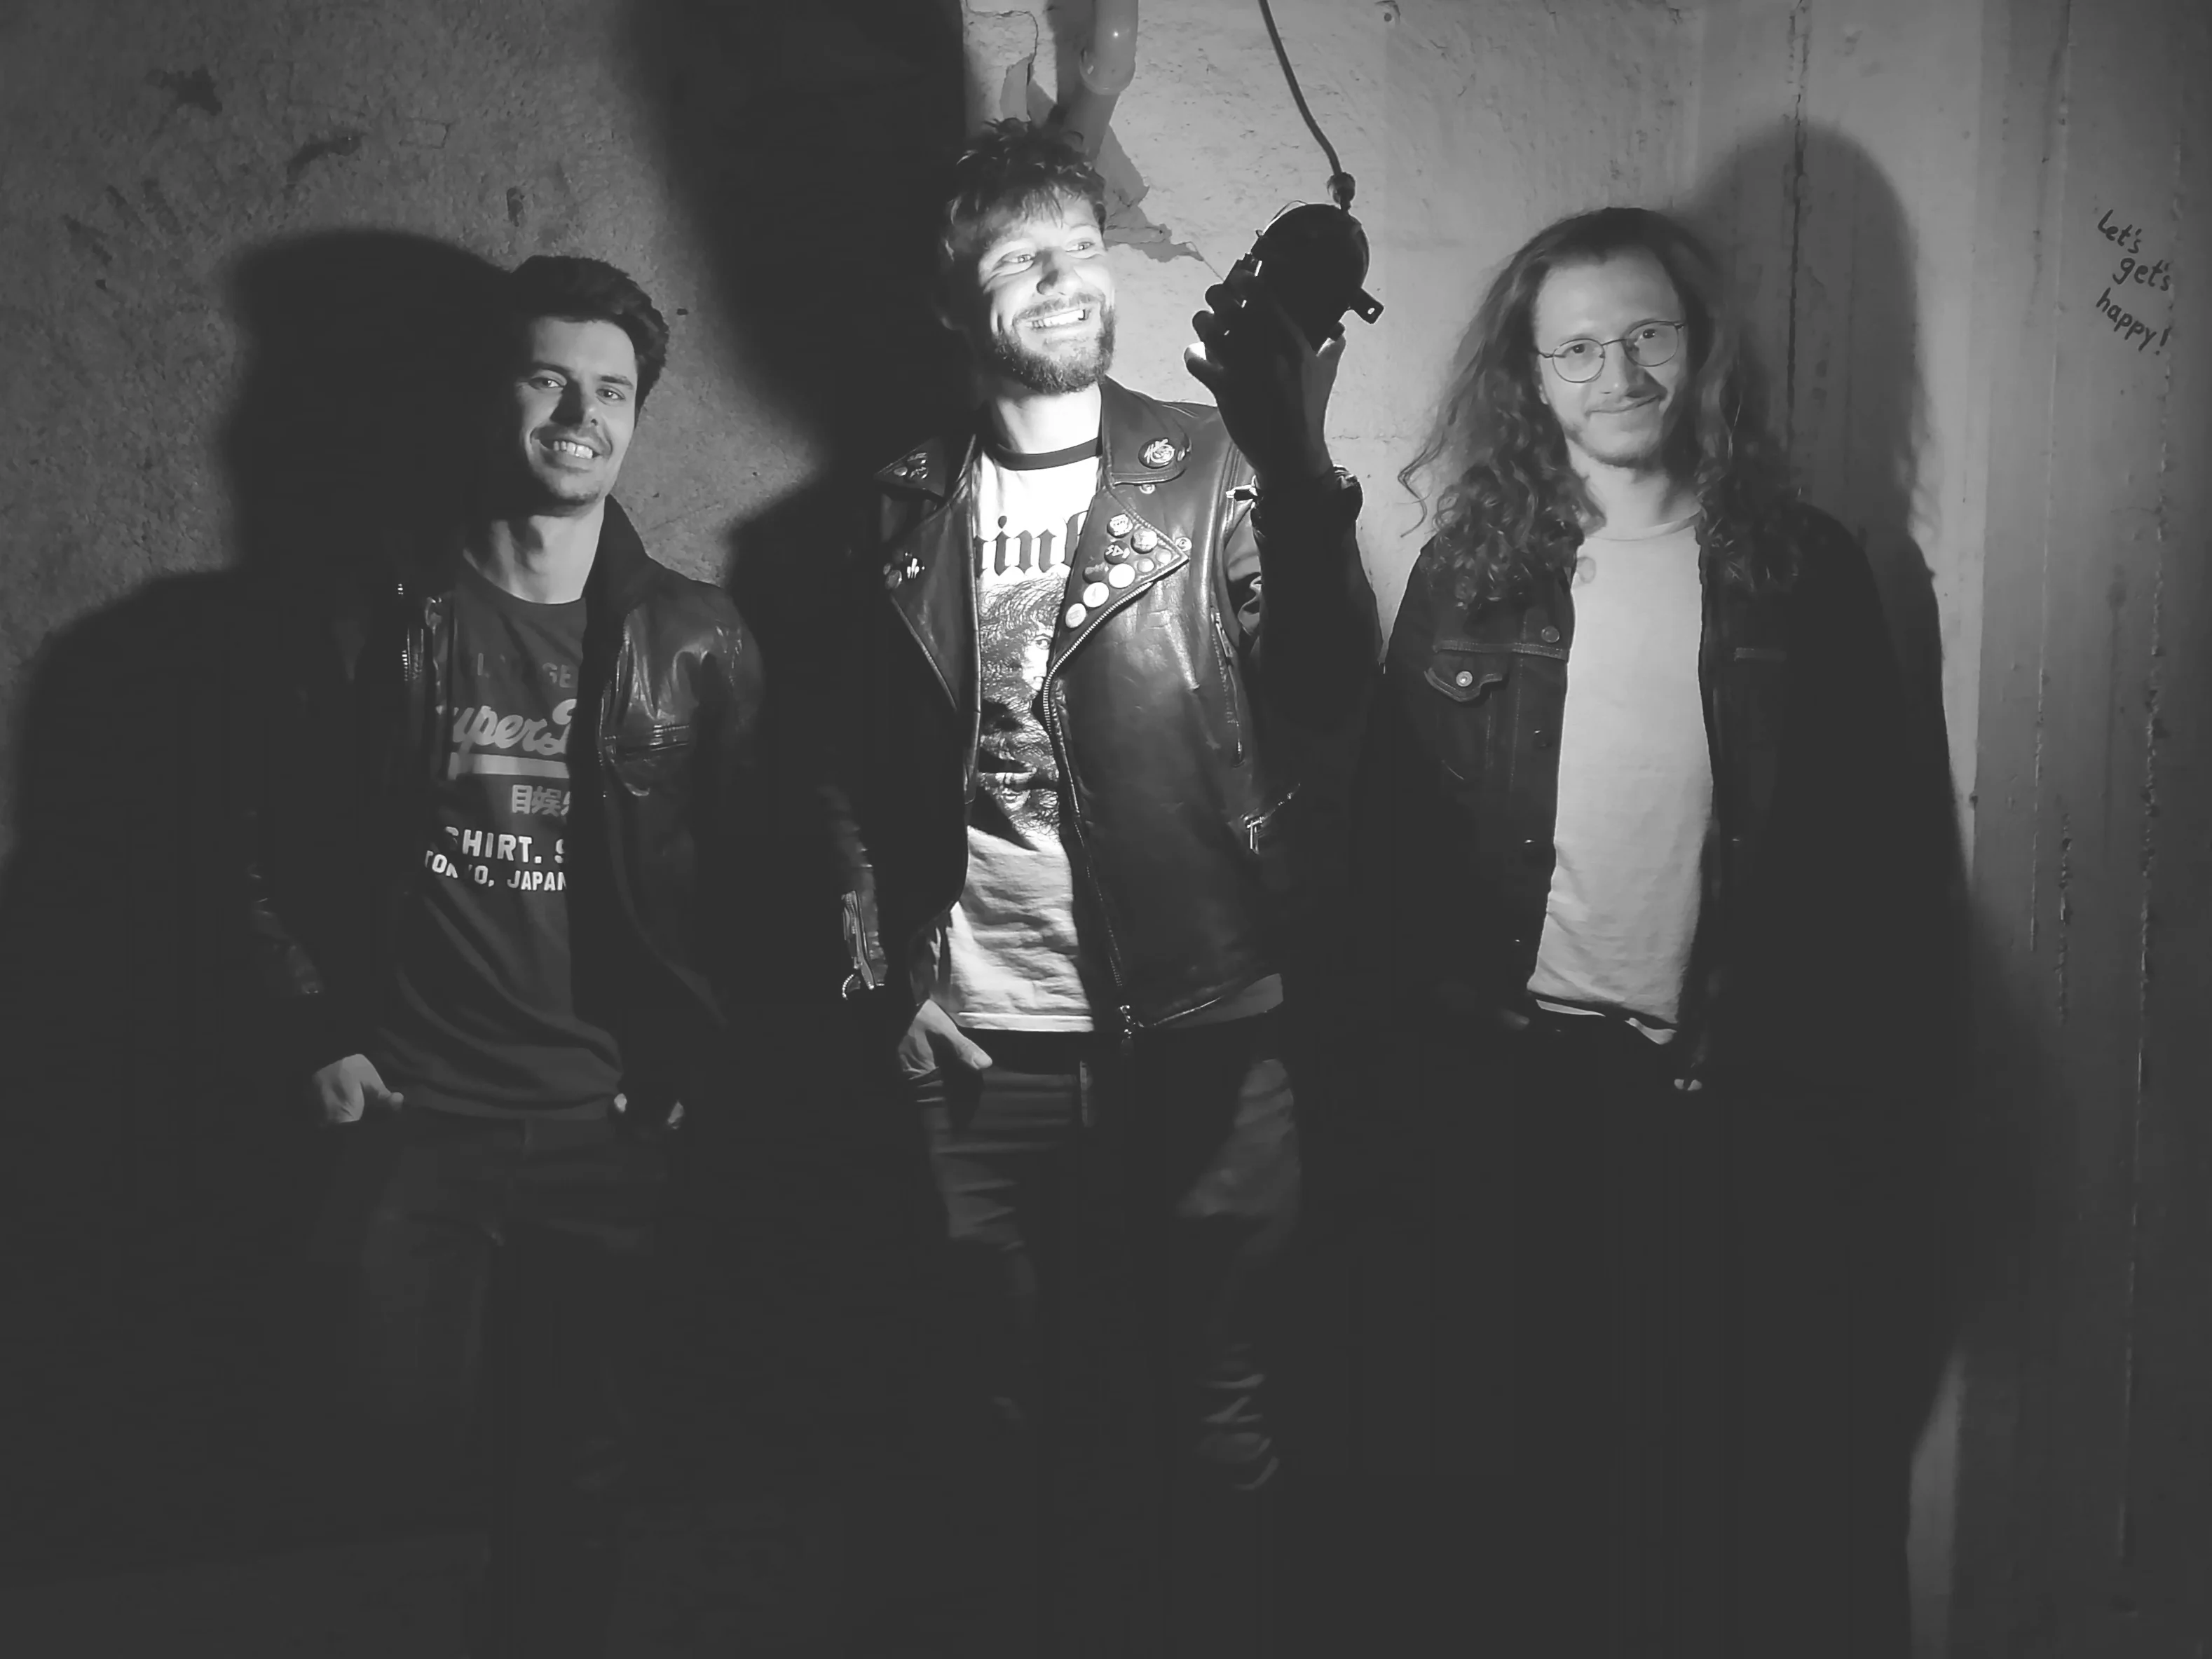 Black and white bandphoto of Bad Age.
Three guys standing in front of a bare wall. Lighted by a cellar lamp the middle one is holding in his hand, facing it.